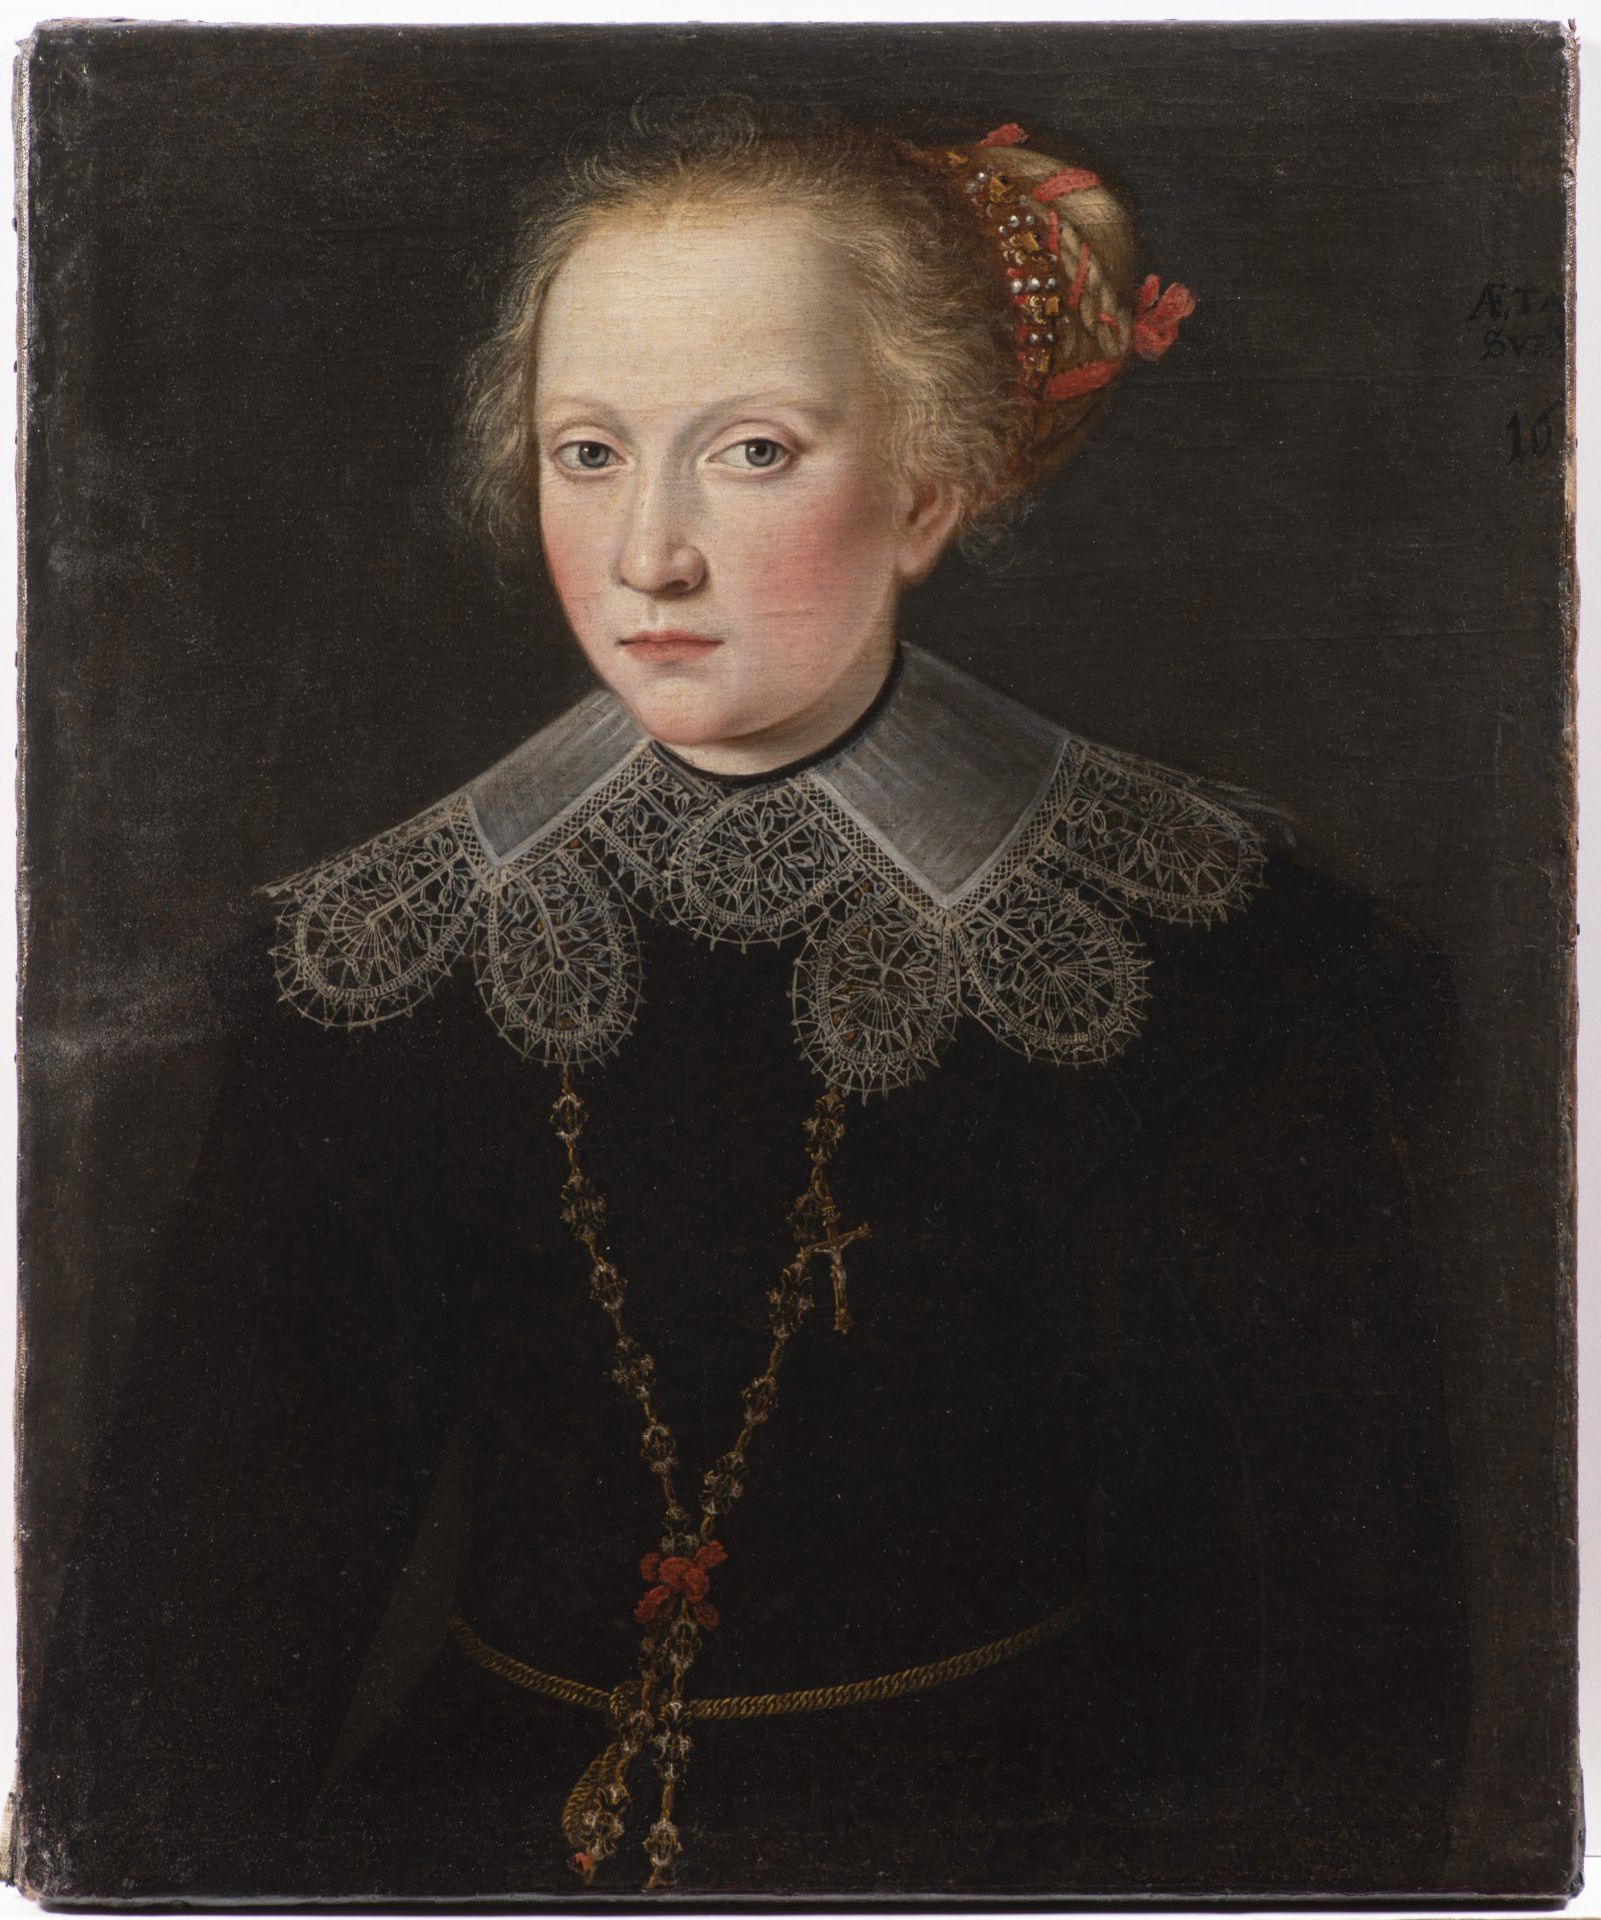 UNKNOWN AUTHOR: A GIRL'S PORTRAIT First half of 17th century Germany Oil on canvas 61,5 x 51 cm